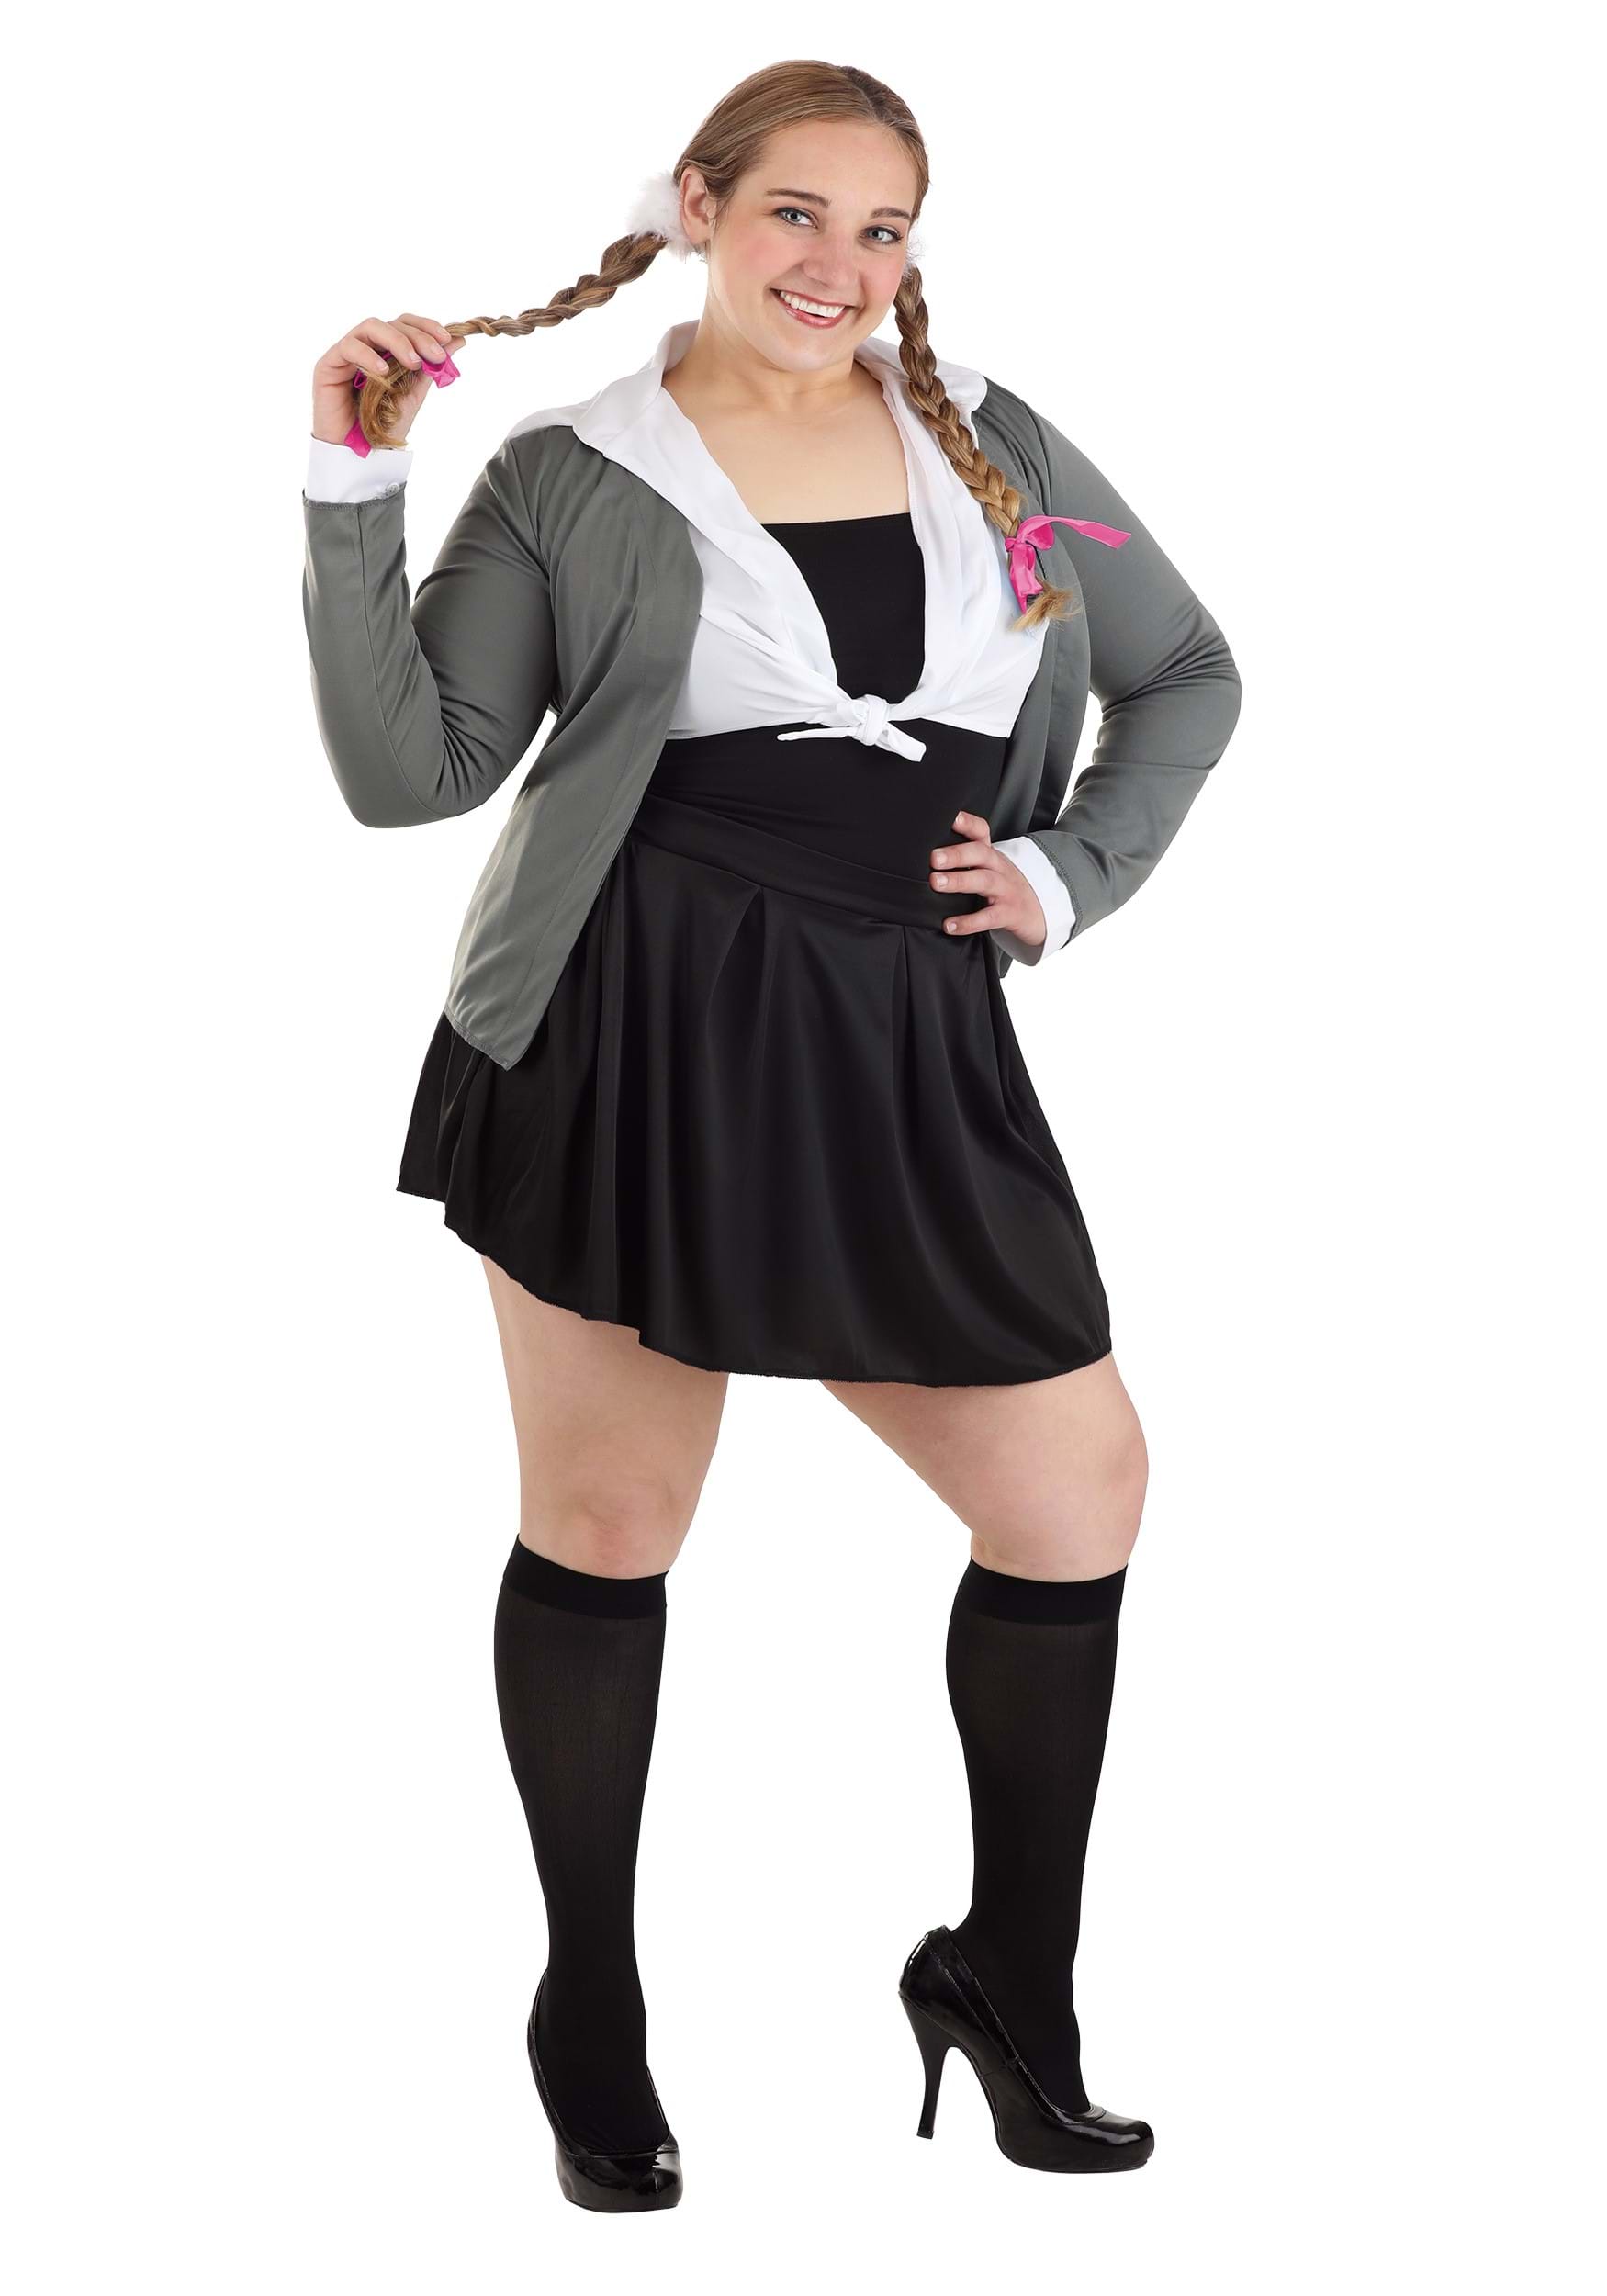 One More Time Pop Singer Costume For Women , Exclusive